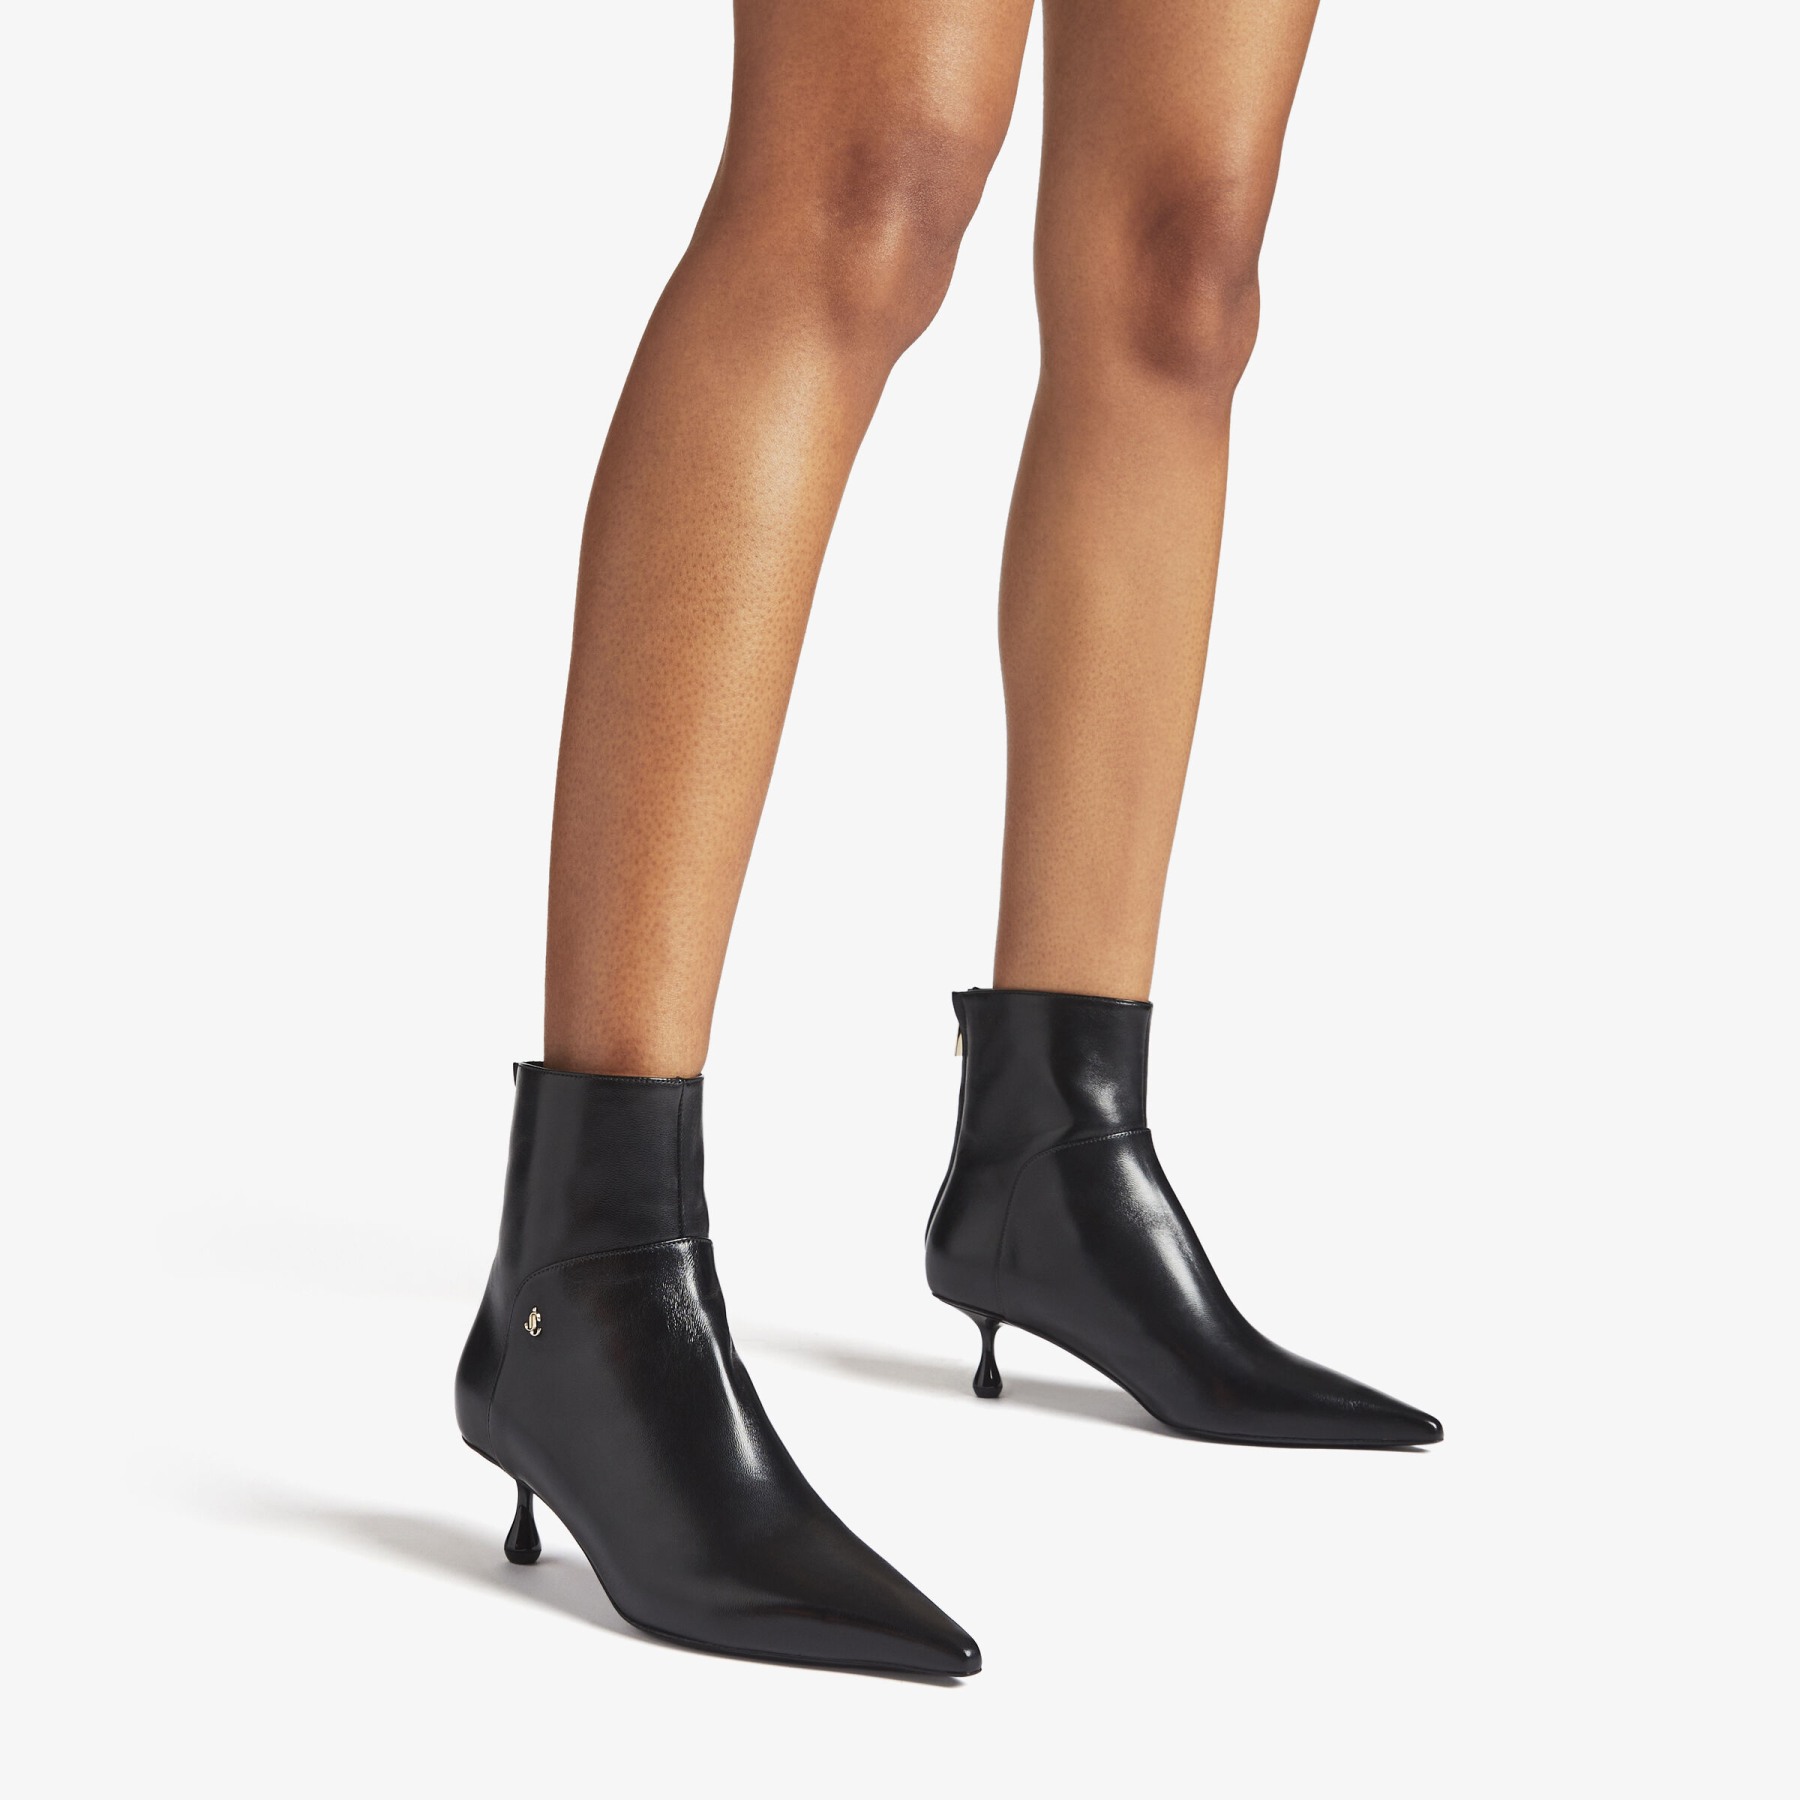 CYCAS AB 50, Black Nappa Leather Ankle Boots, New Collection